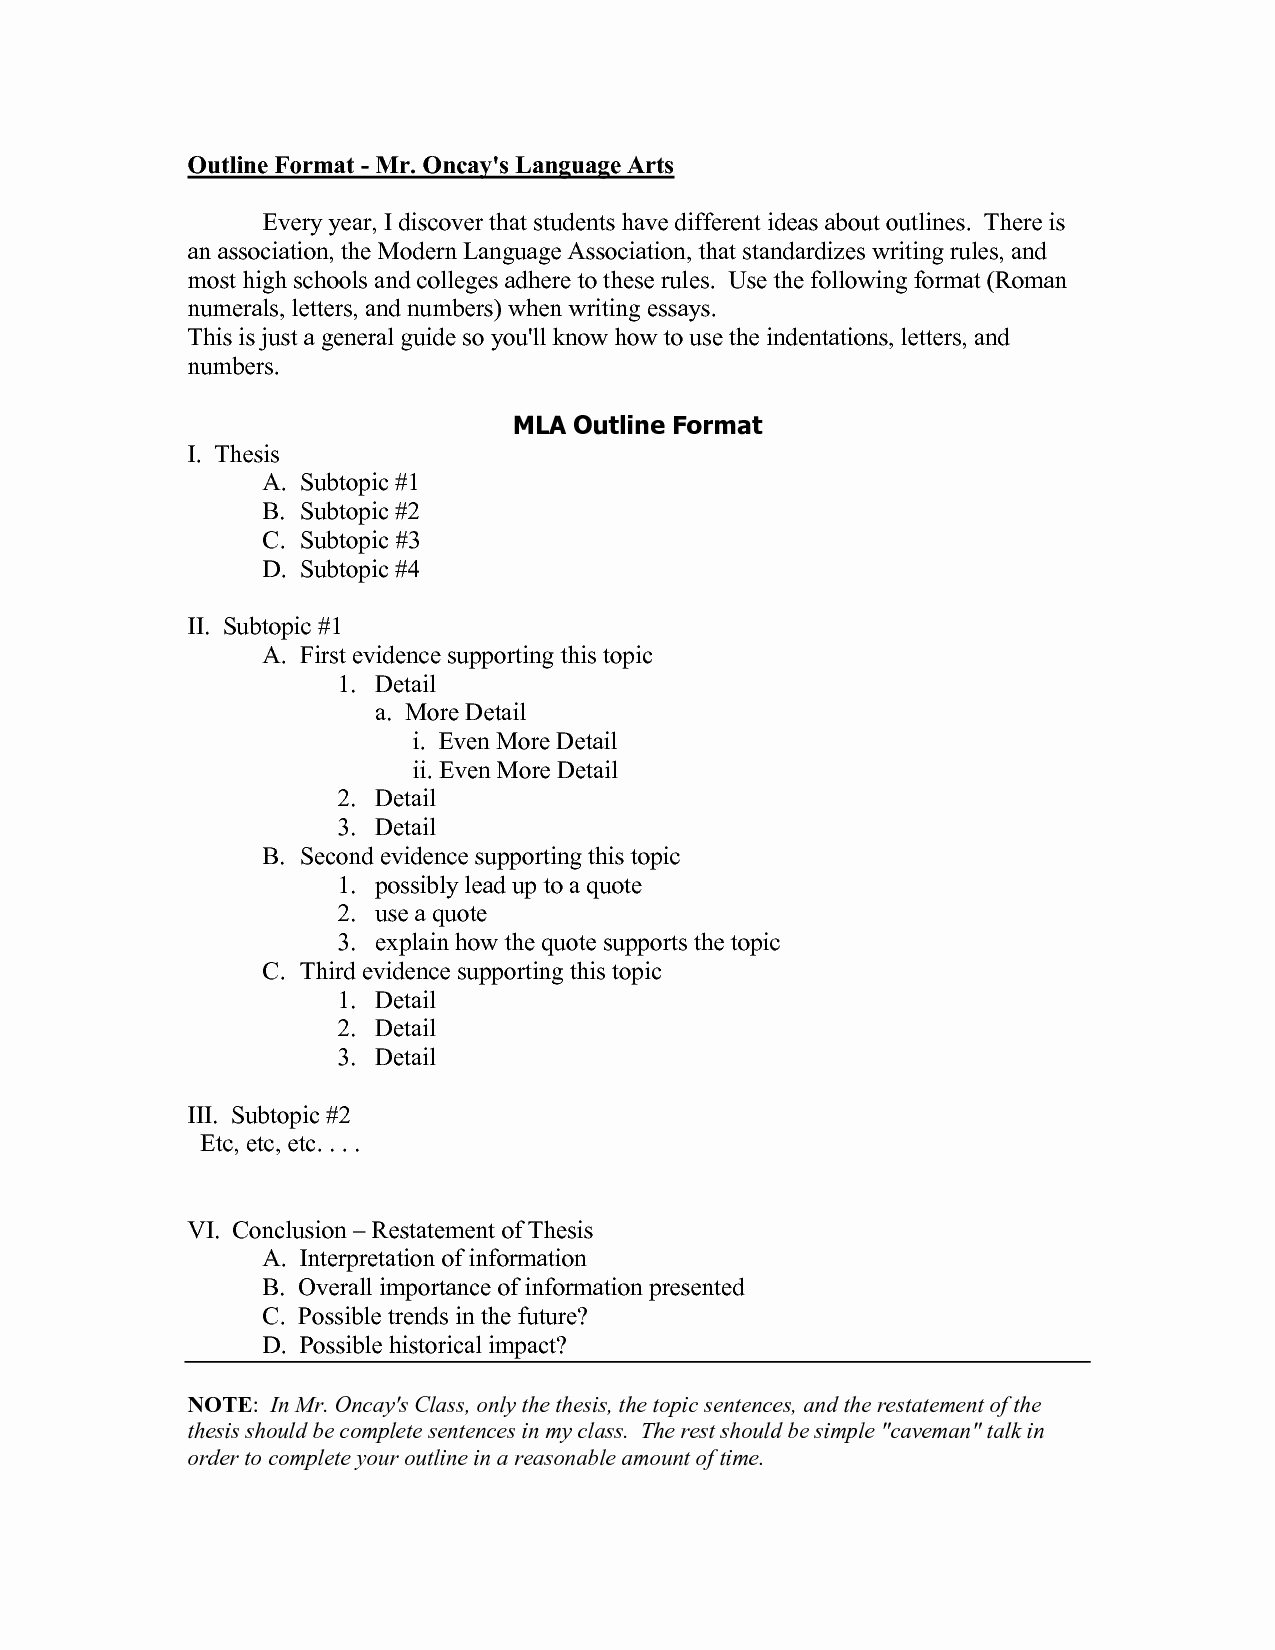 Mla format Outline Template Lovely Ready Research Paper About Three Alternate Options to